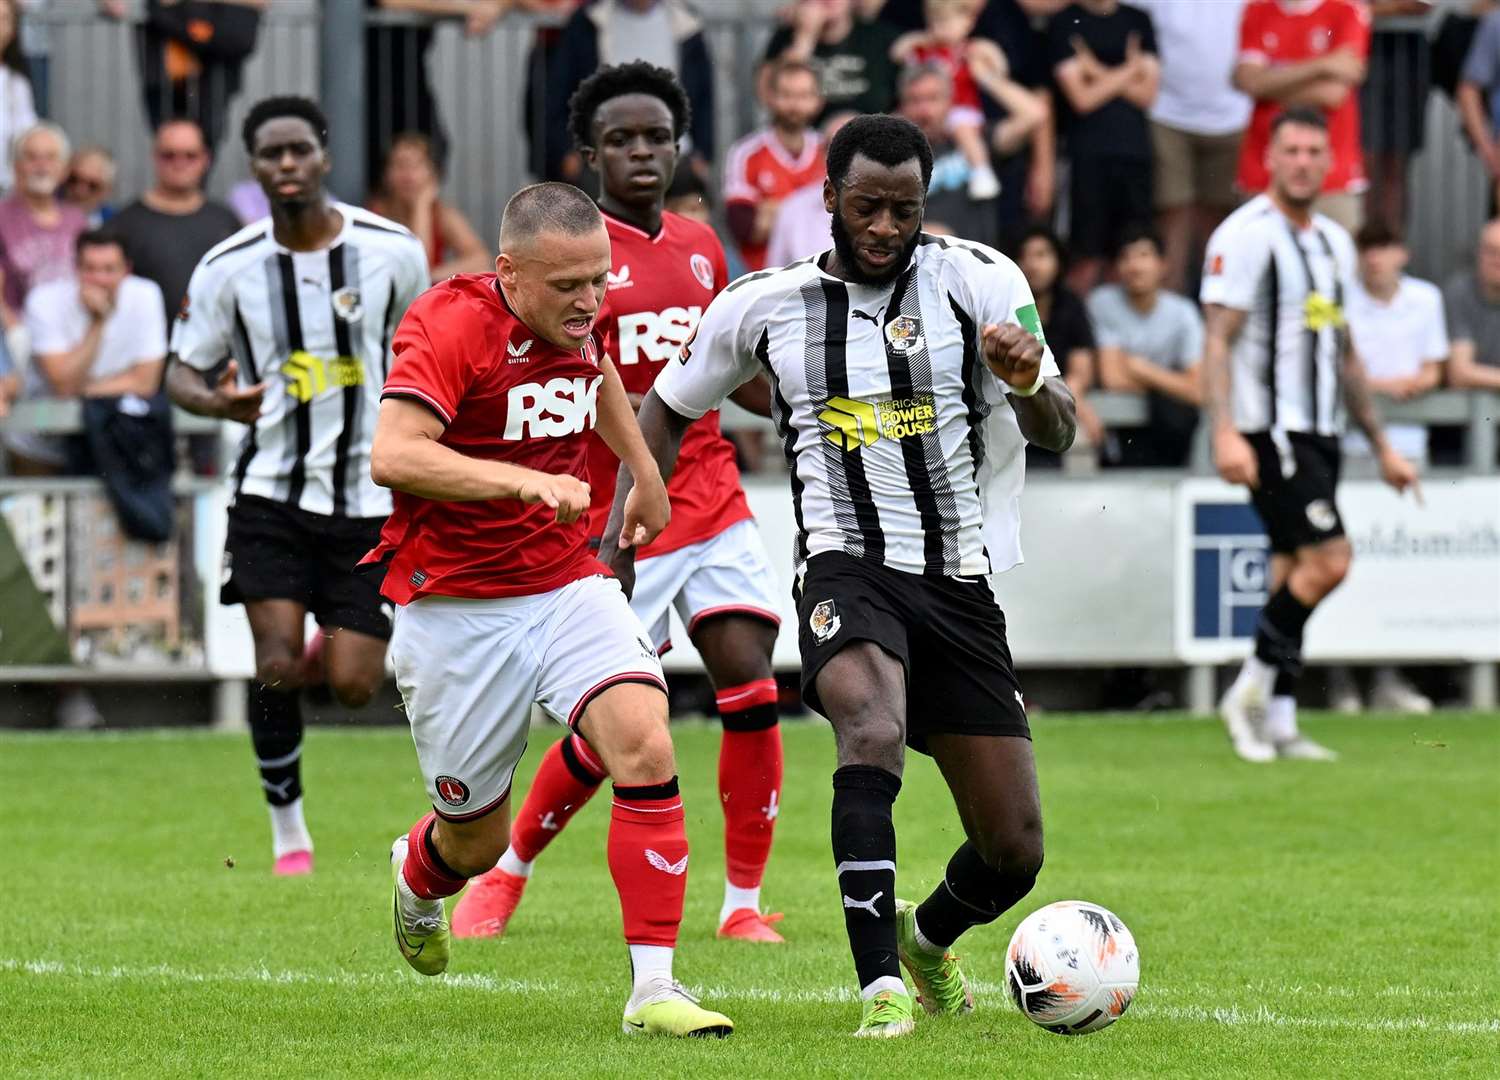 Tyrell Miller-Rodney on the ball for Dartford during Saturday’s pre-season friendly with Charlton. Picture: Keith Gillard